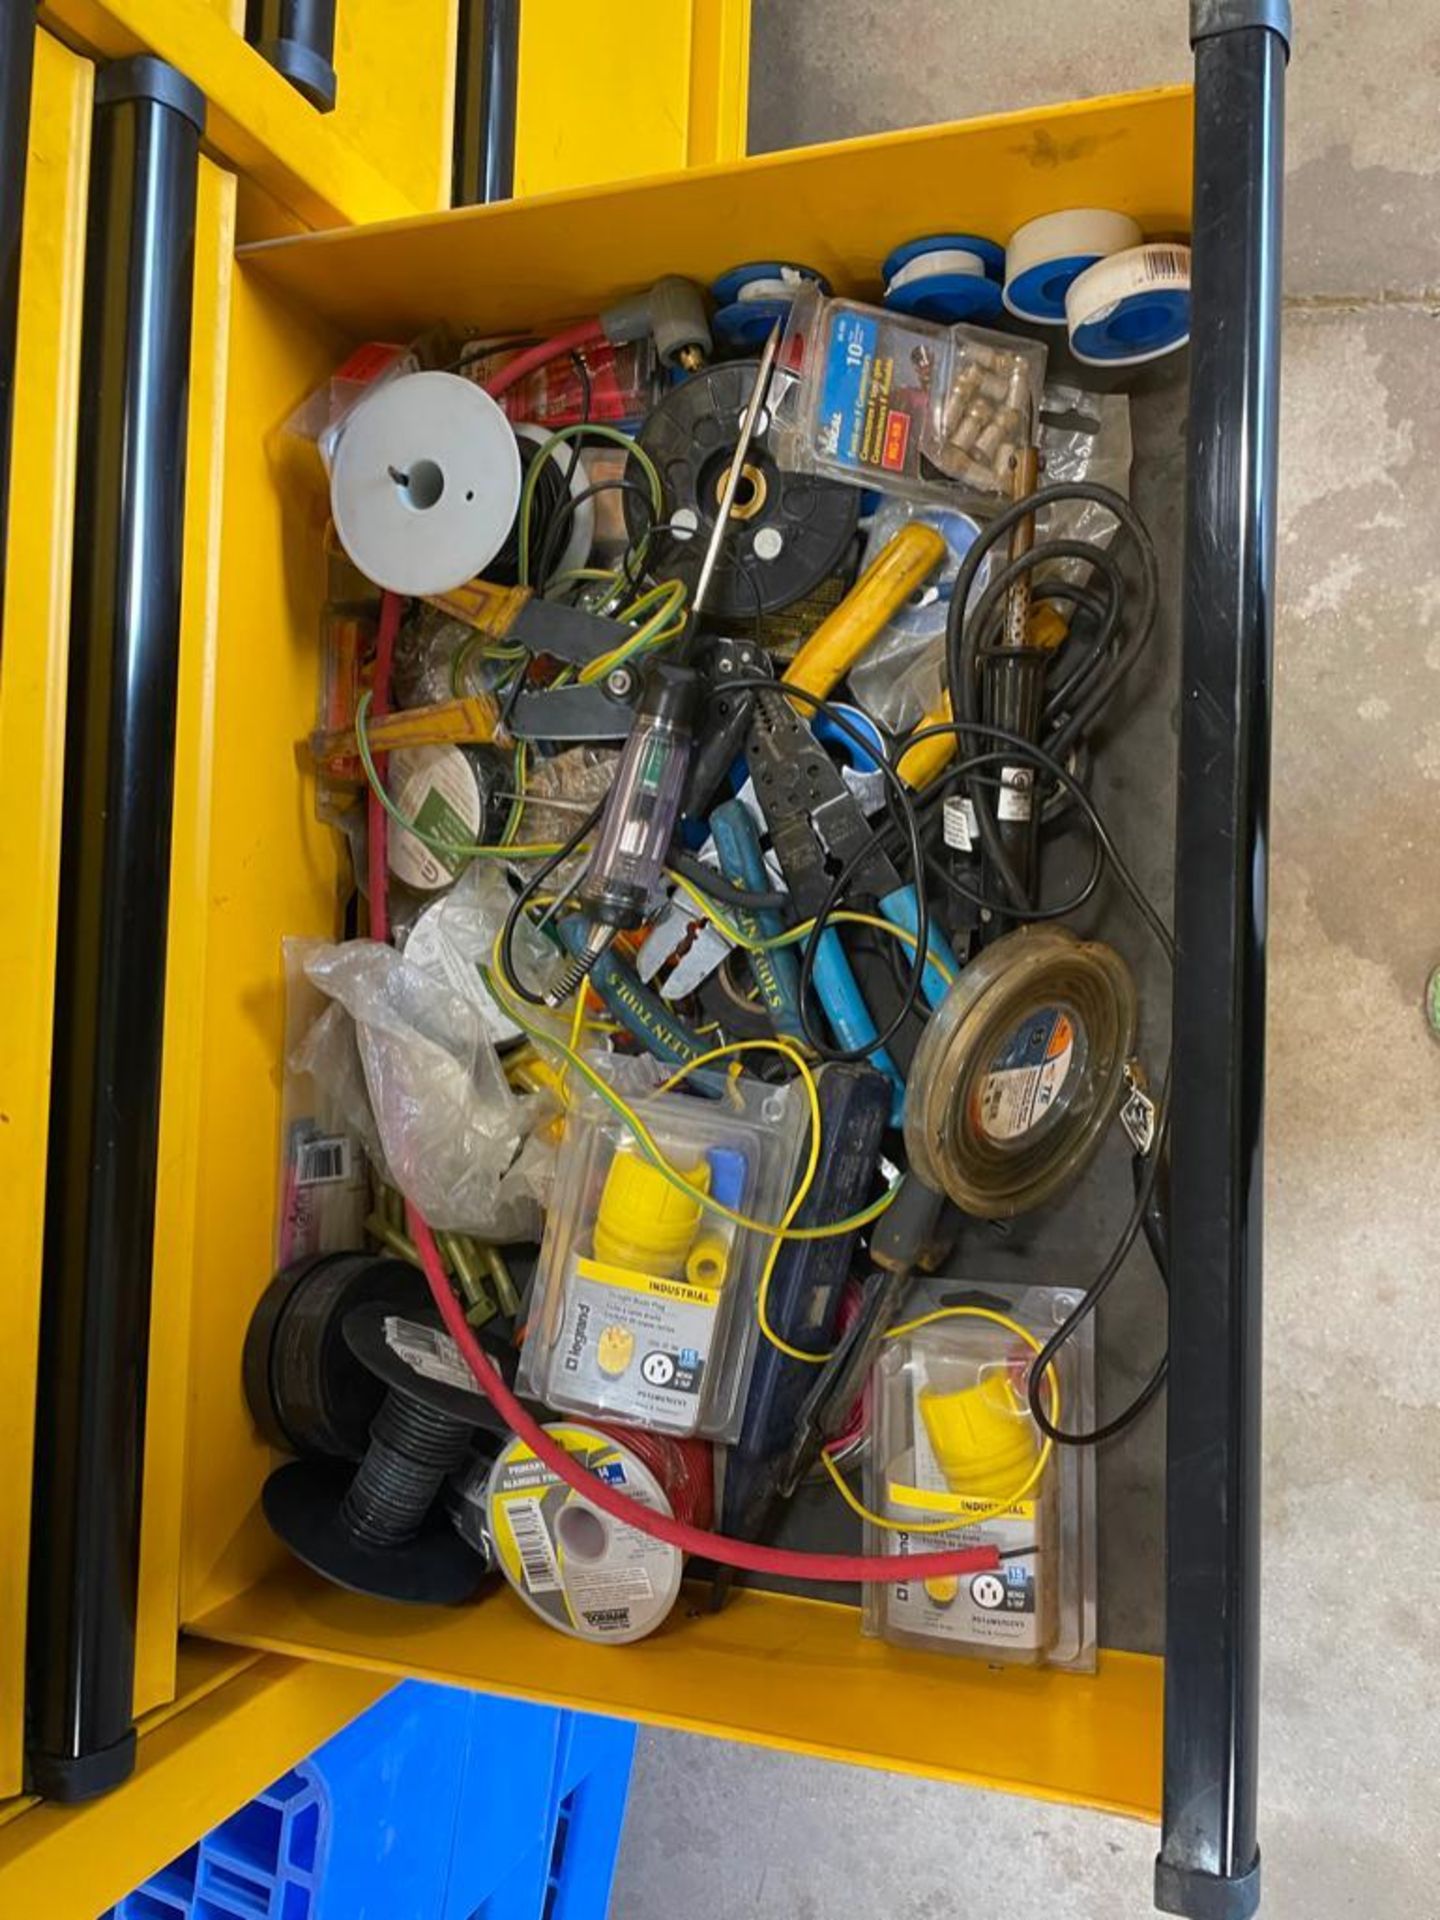 DeWalt Mechanics Tool Box with Contents, Wrenches, Sockets, Plyers, Pipe Wrench, Screwdrivers, etc. - Image 22 of 24